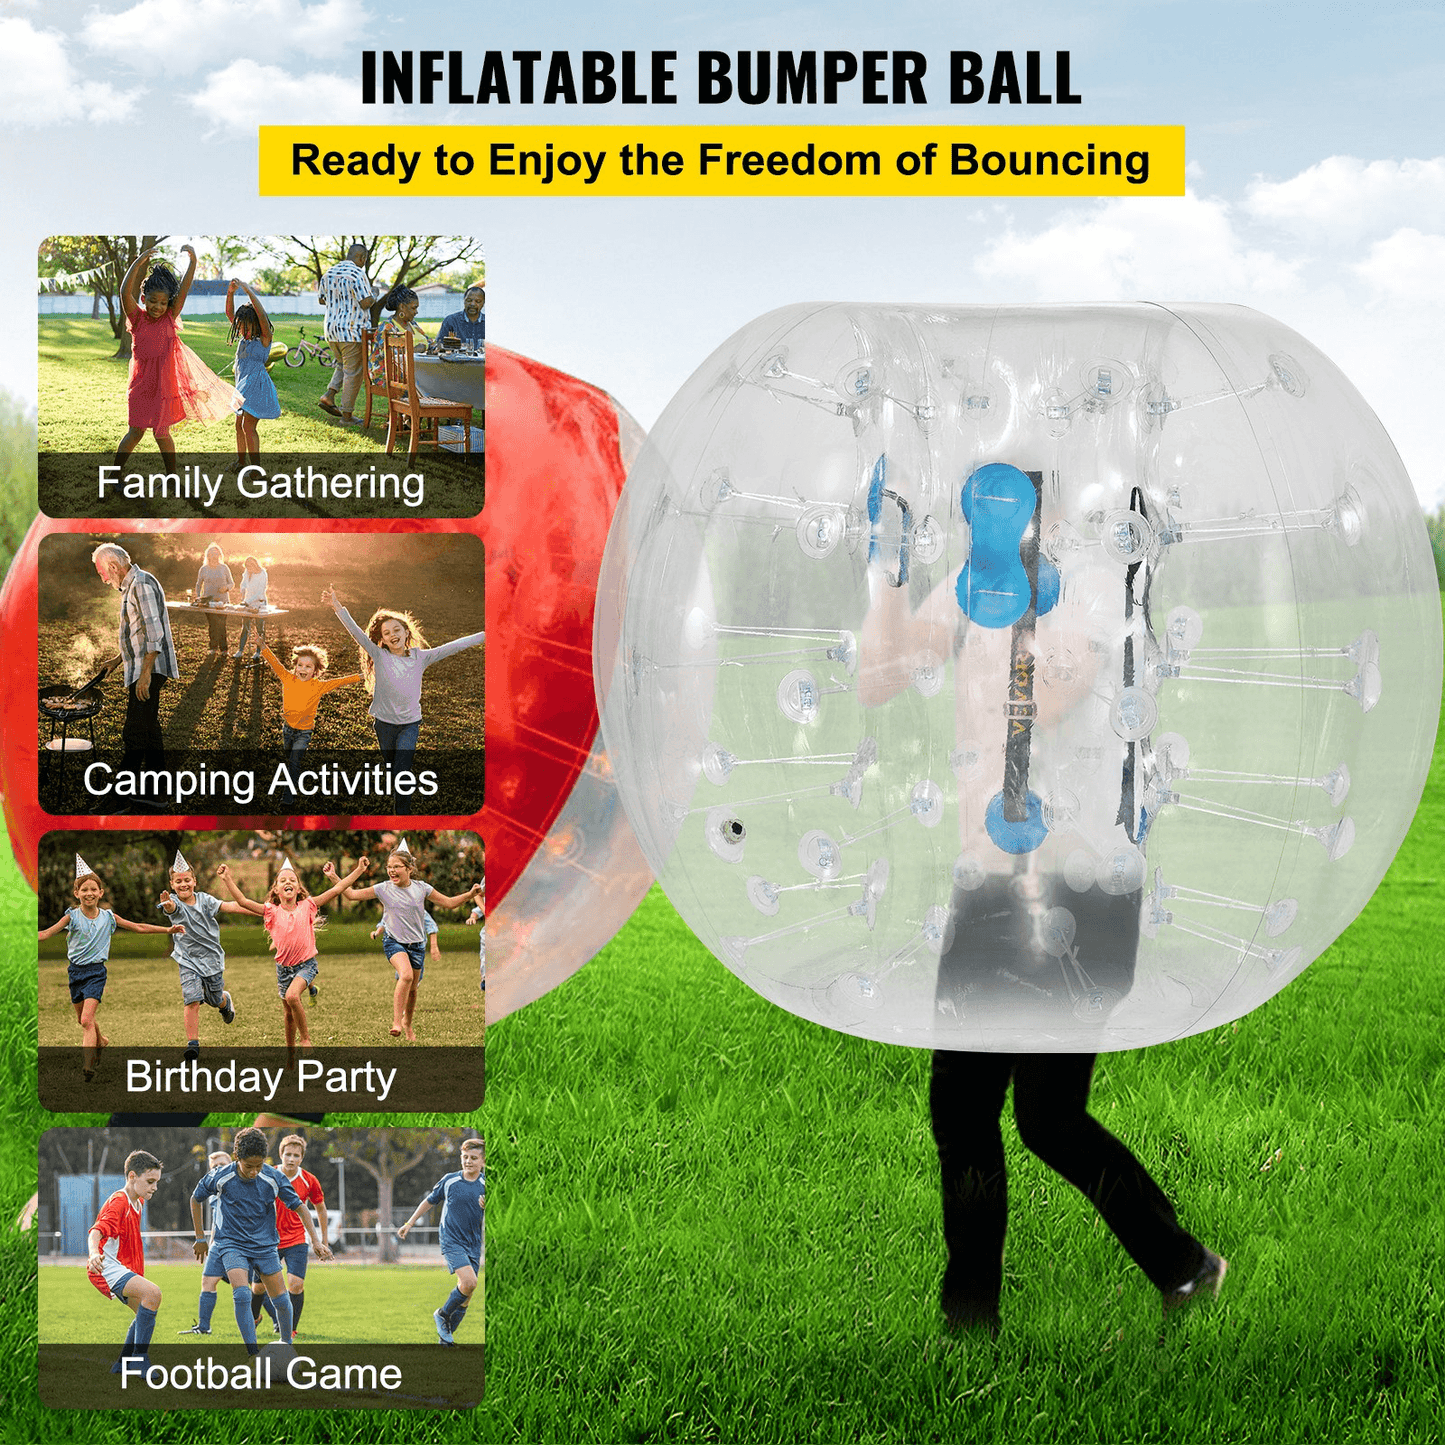 VEVOR Inflatable Bumper Ball 4 FT / 1.2M Diameter, Bubble Soccer Ball, Blow It Up in 5 Min, Inflatable Zorb Ball for Adults or Children (4 FT, Transparent) - Loomini